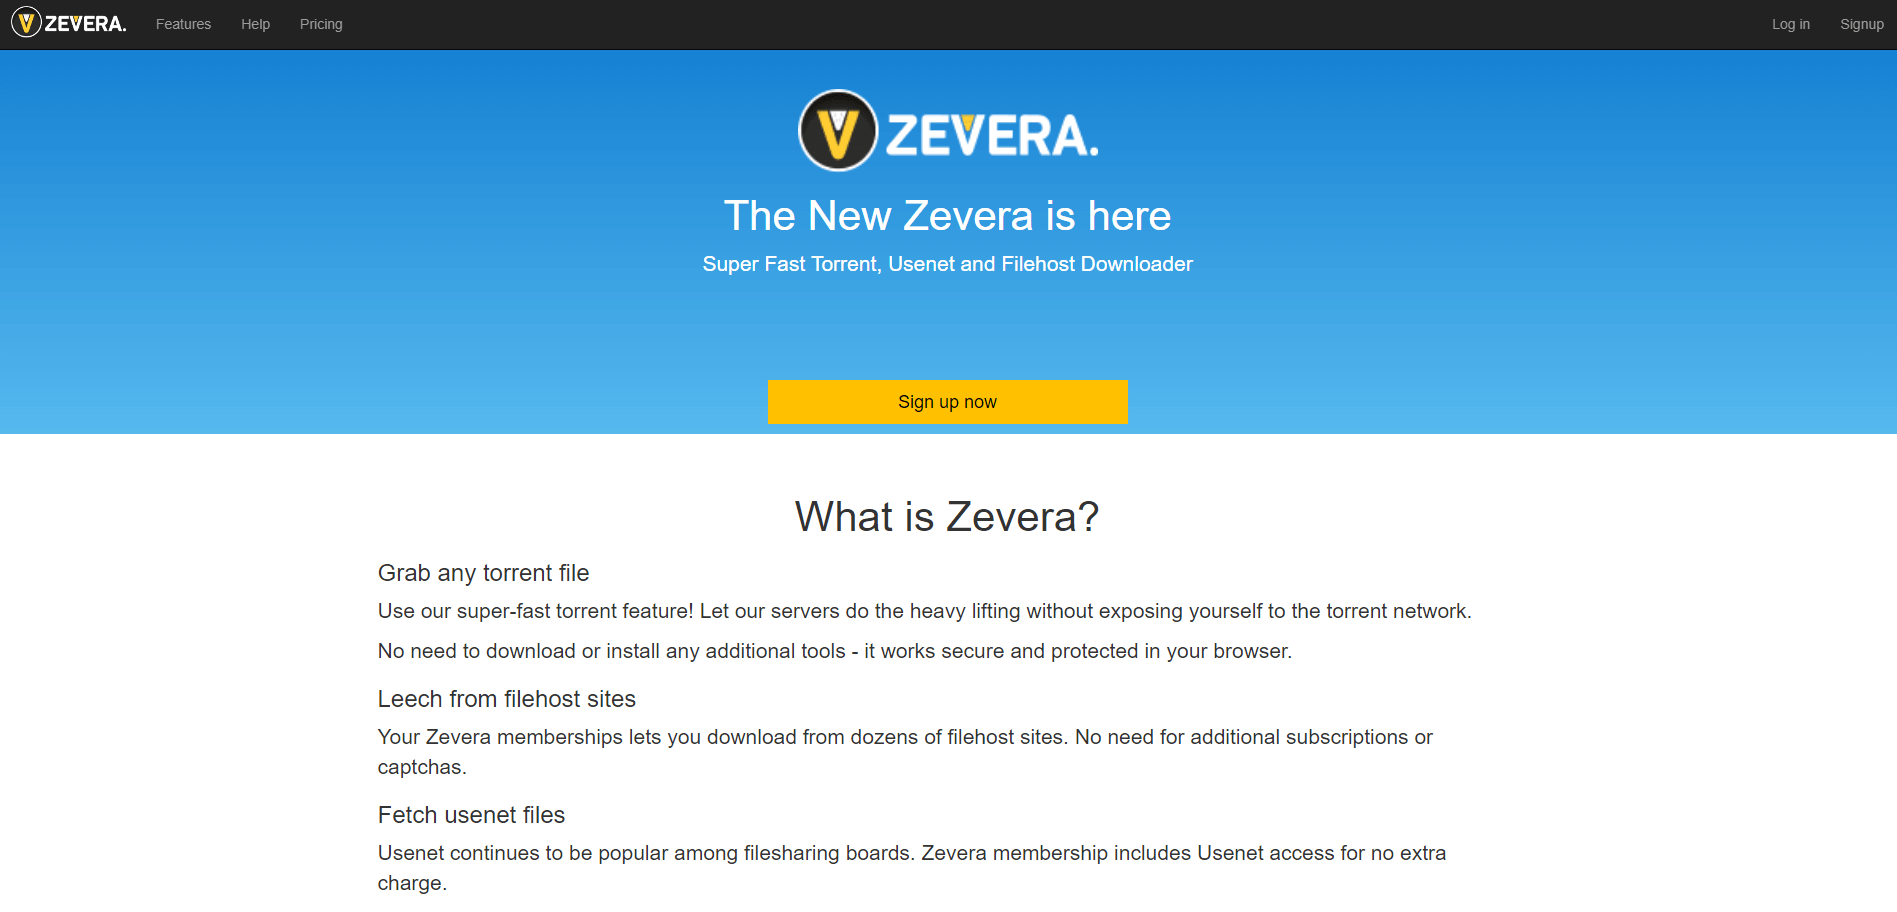 The Zevera design is simple, yet tells everything